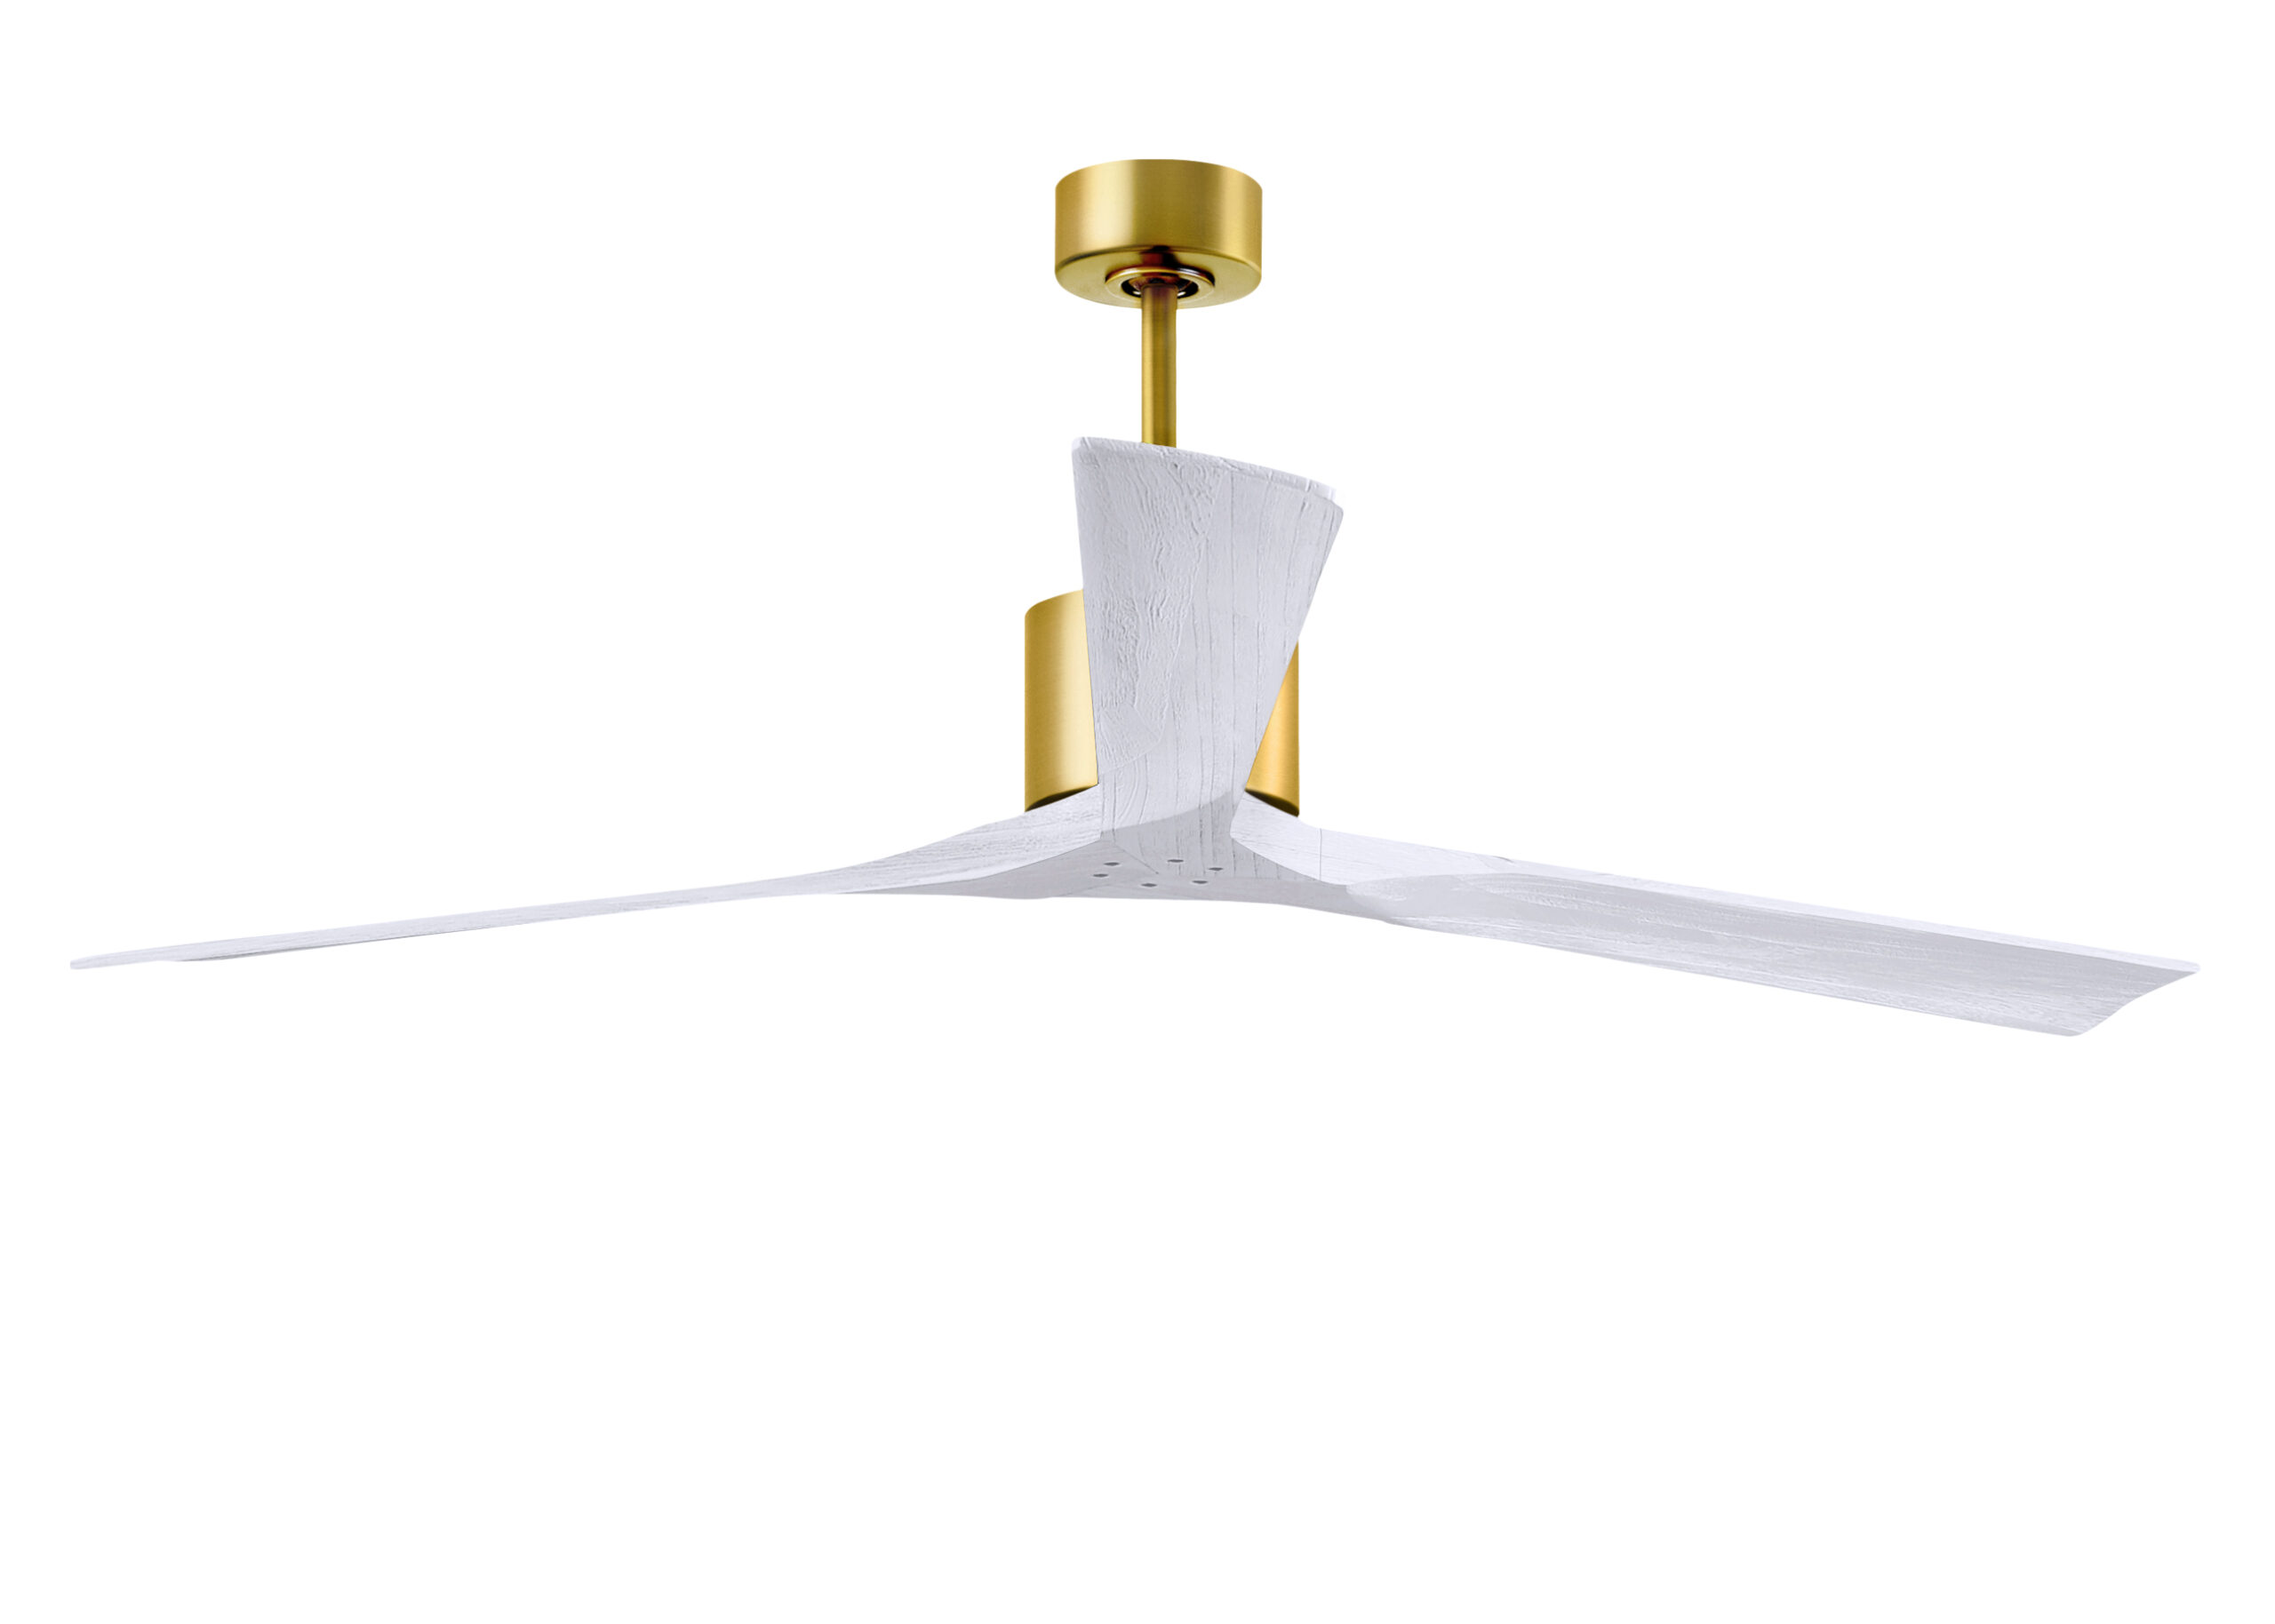 Nan XL Ceiling Fan in Brushed Brass with 72” Matte White Blades